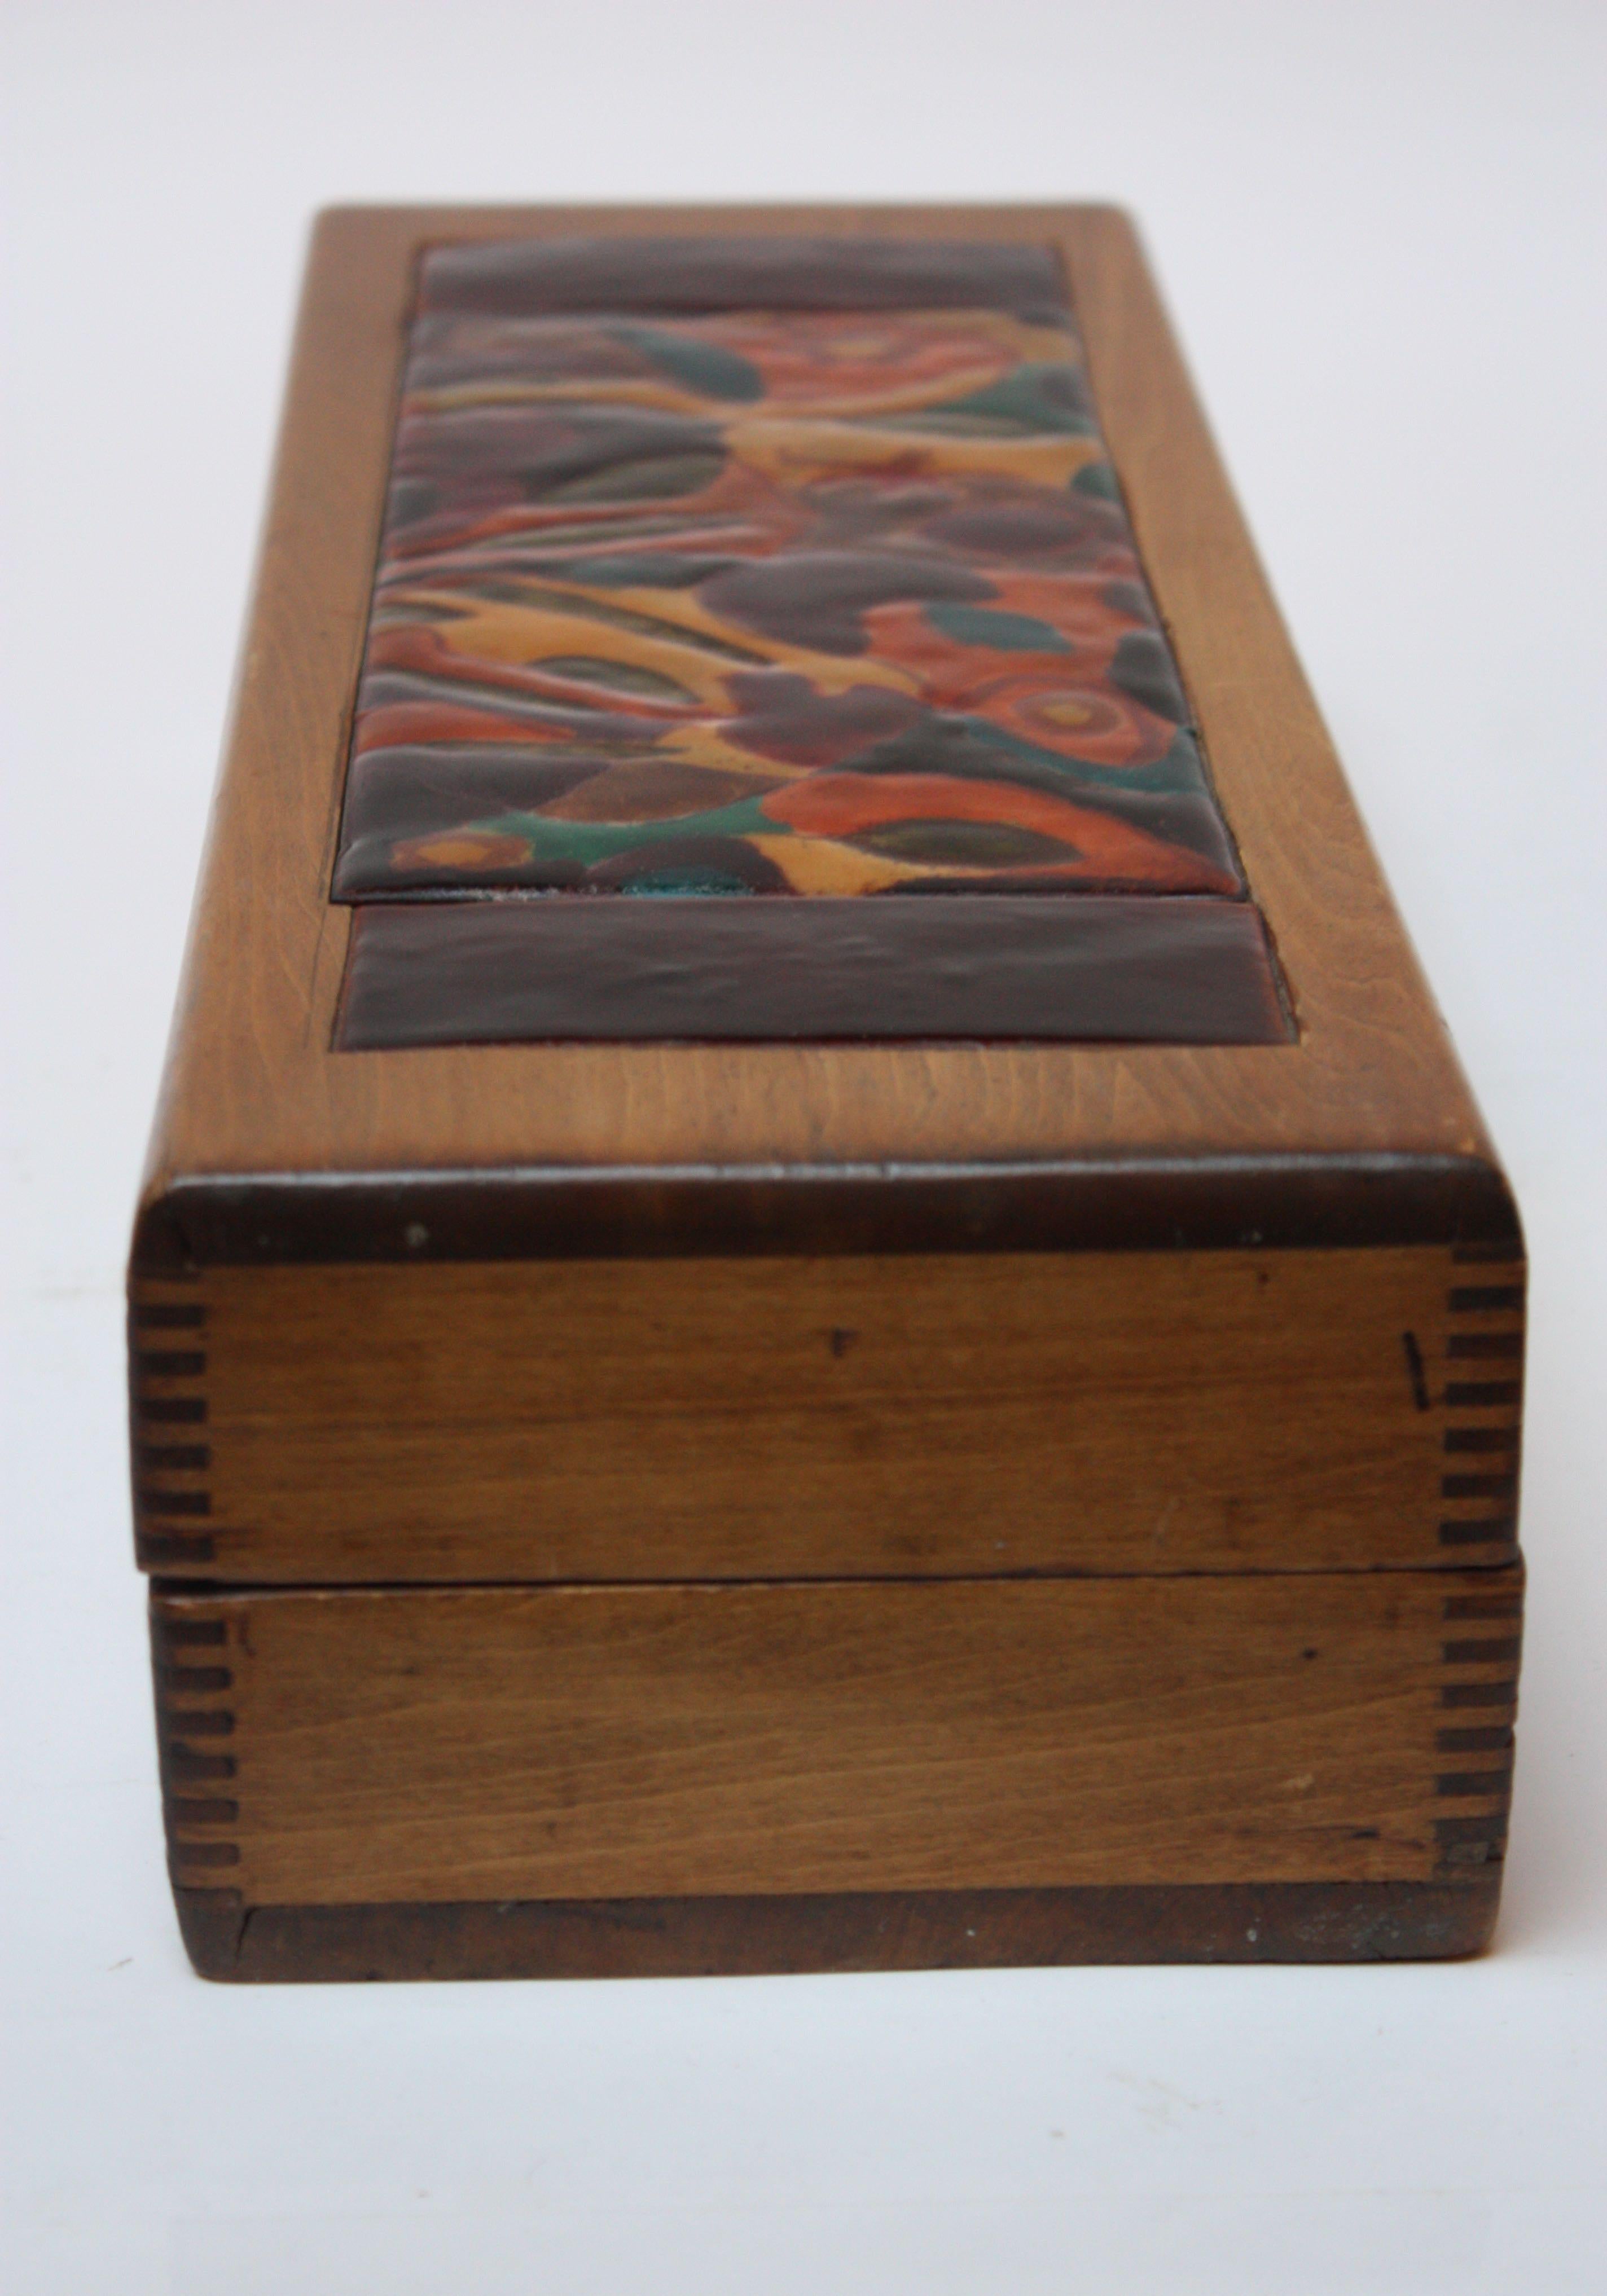 1940s Enamel and Wooden Box by Elizabeth Bensley In Good Condition For Sale In Brooklyn, NY